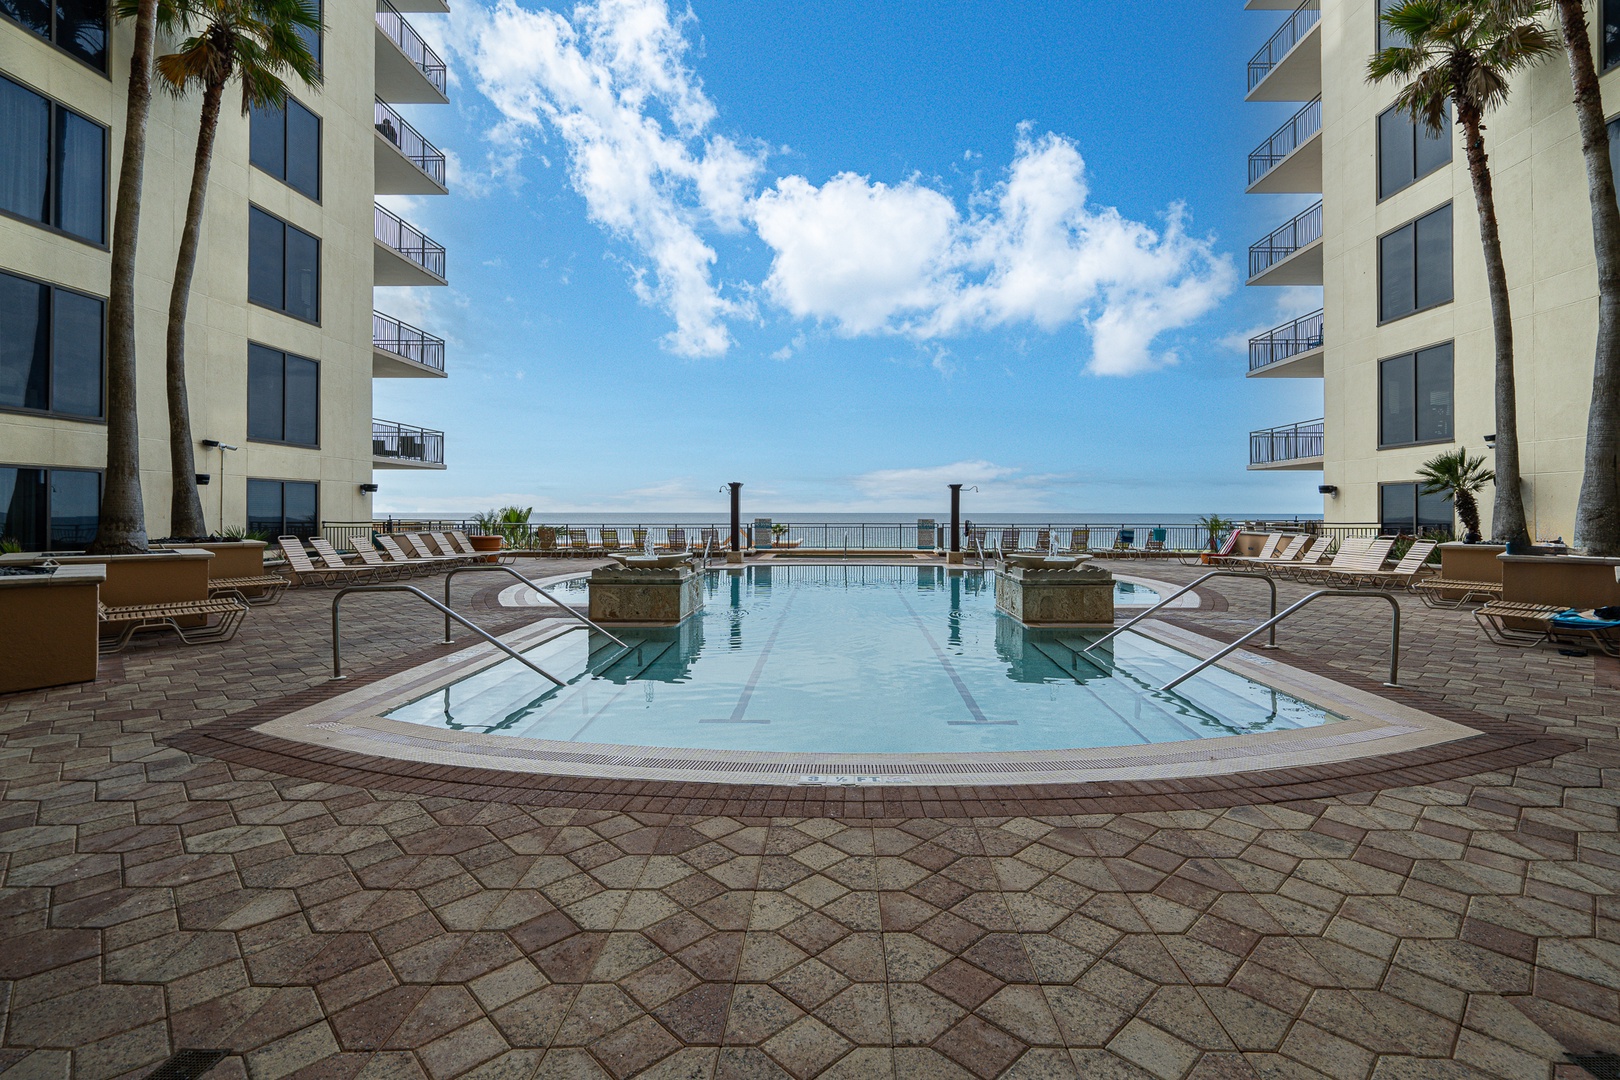 Lounge the day away or make a splash at the sparkling community pool!